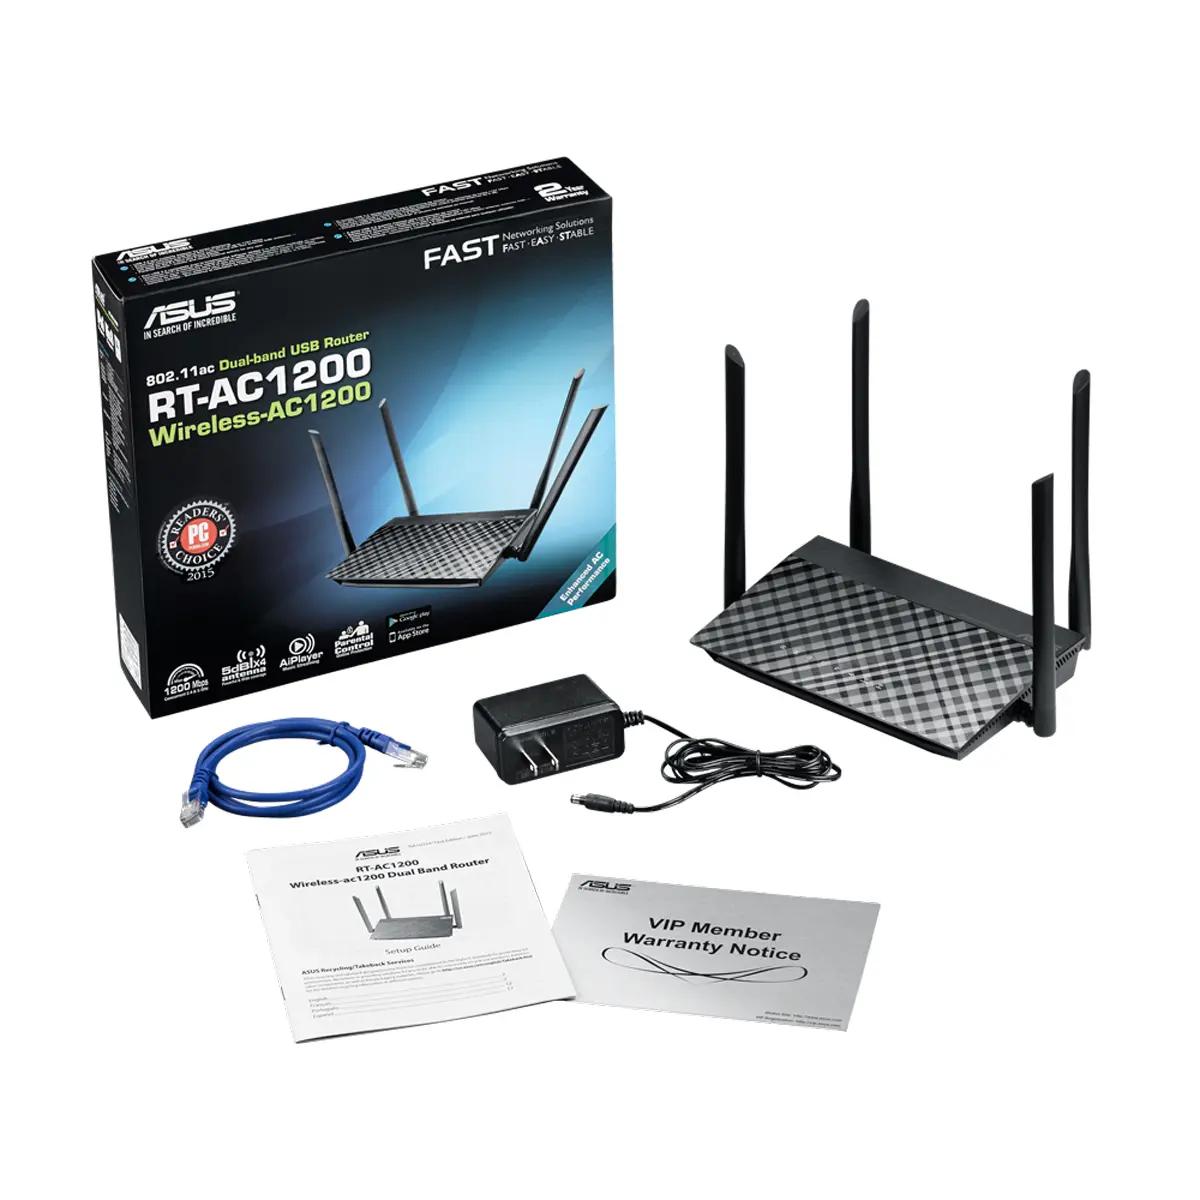 asus-wireless-ac1200-dual-band-router-1200px-v1-00051.webp